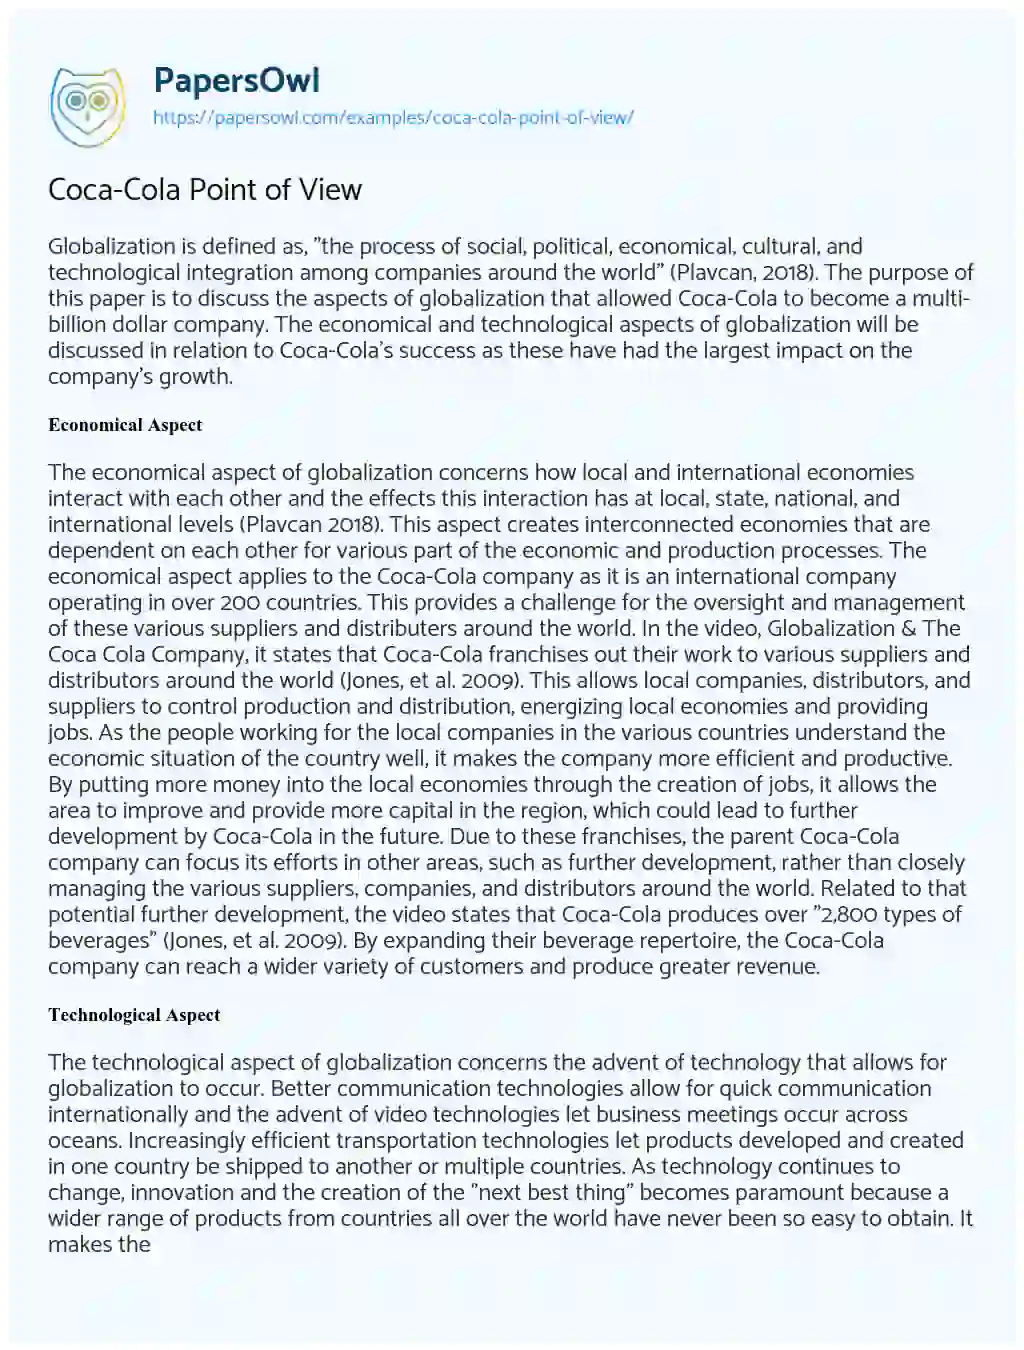 Essay on Coca-Cola Point of View